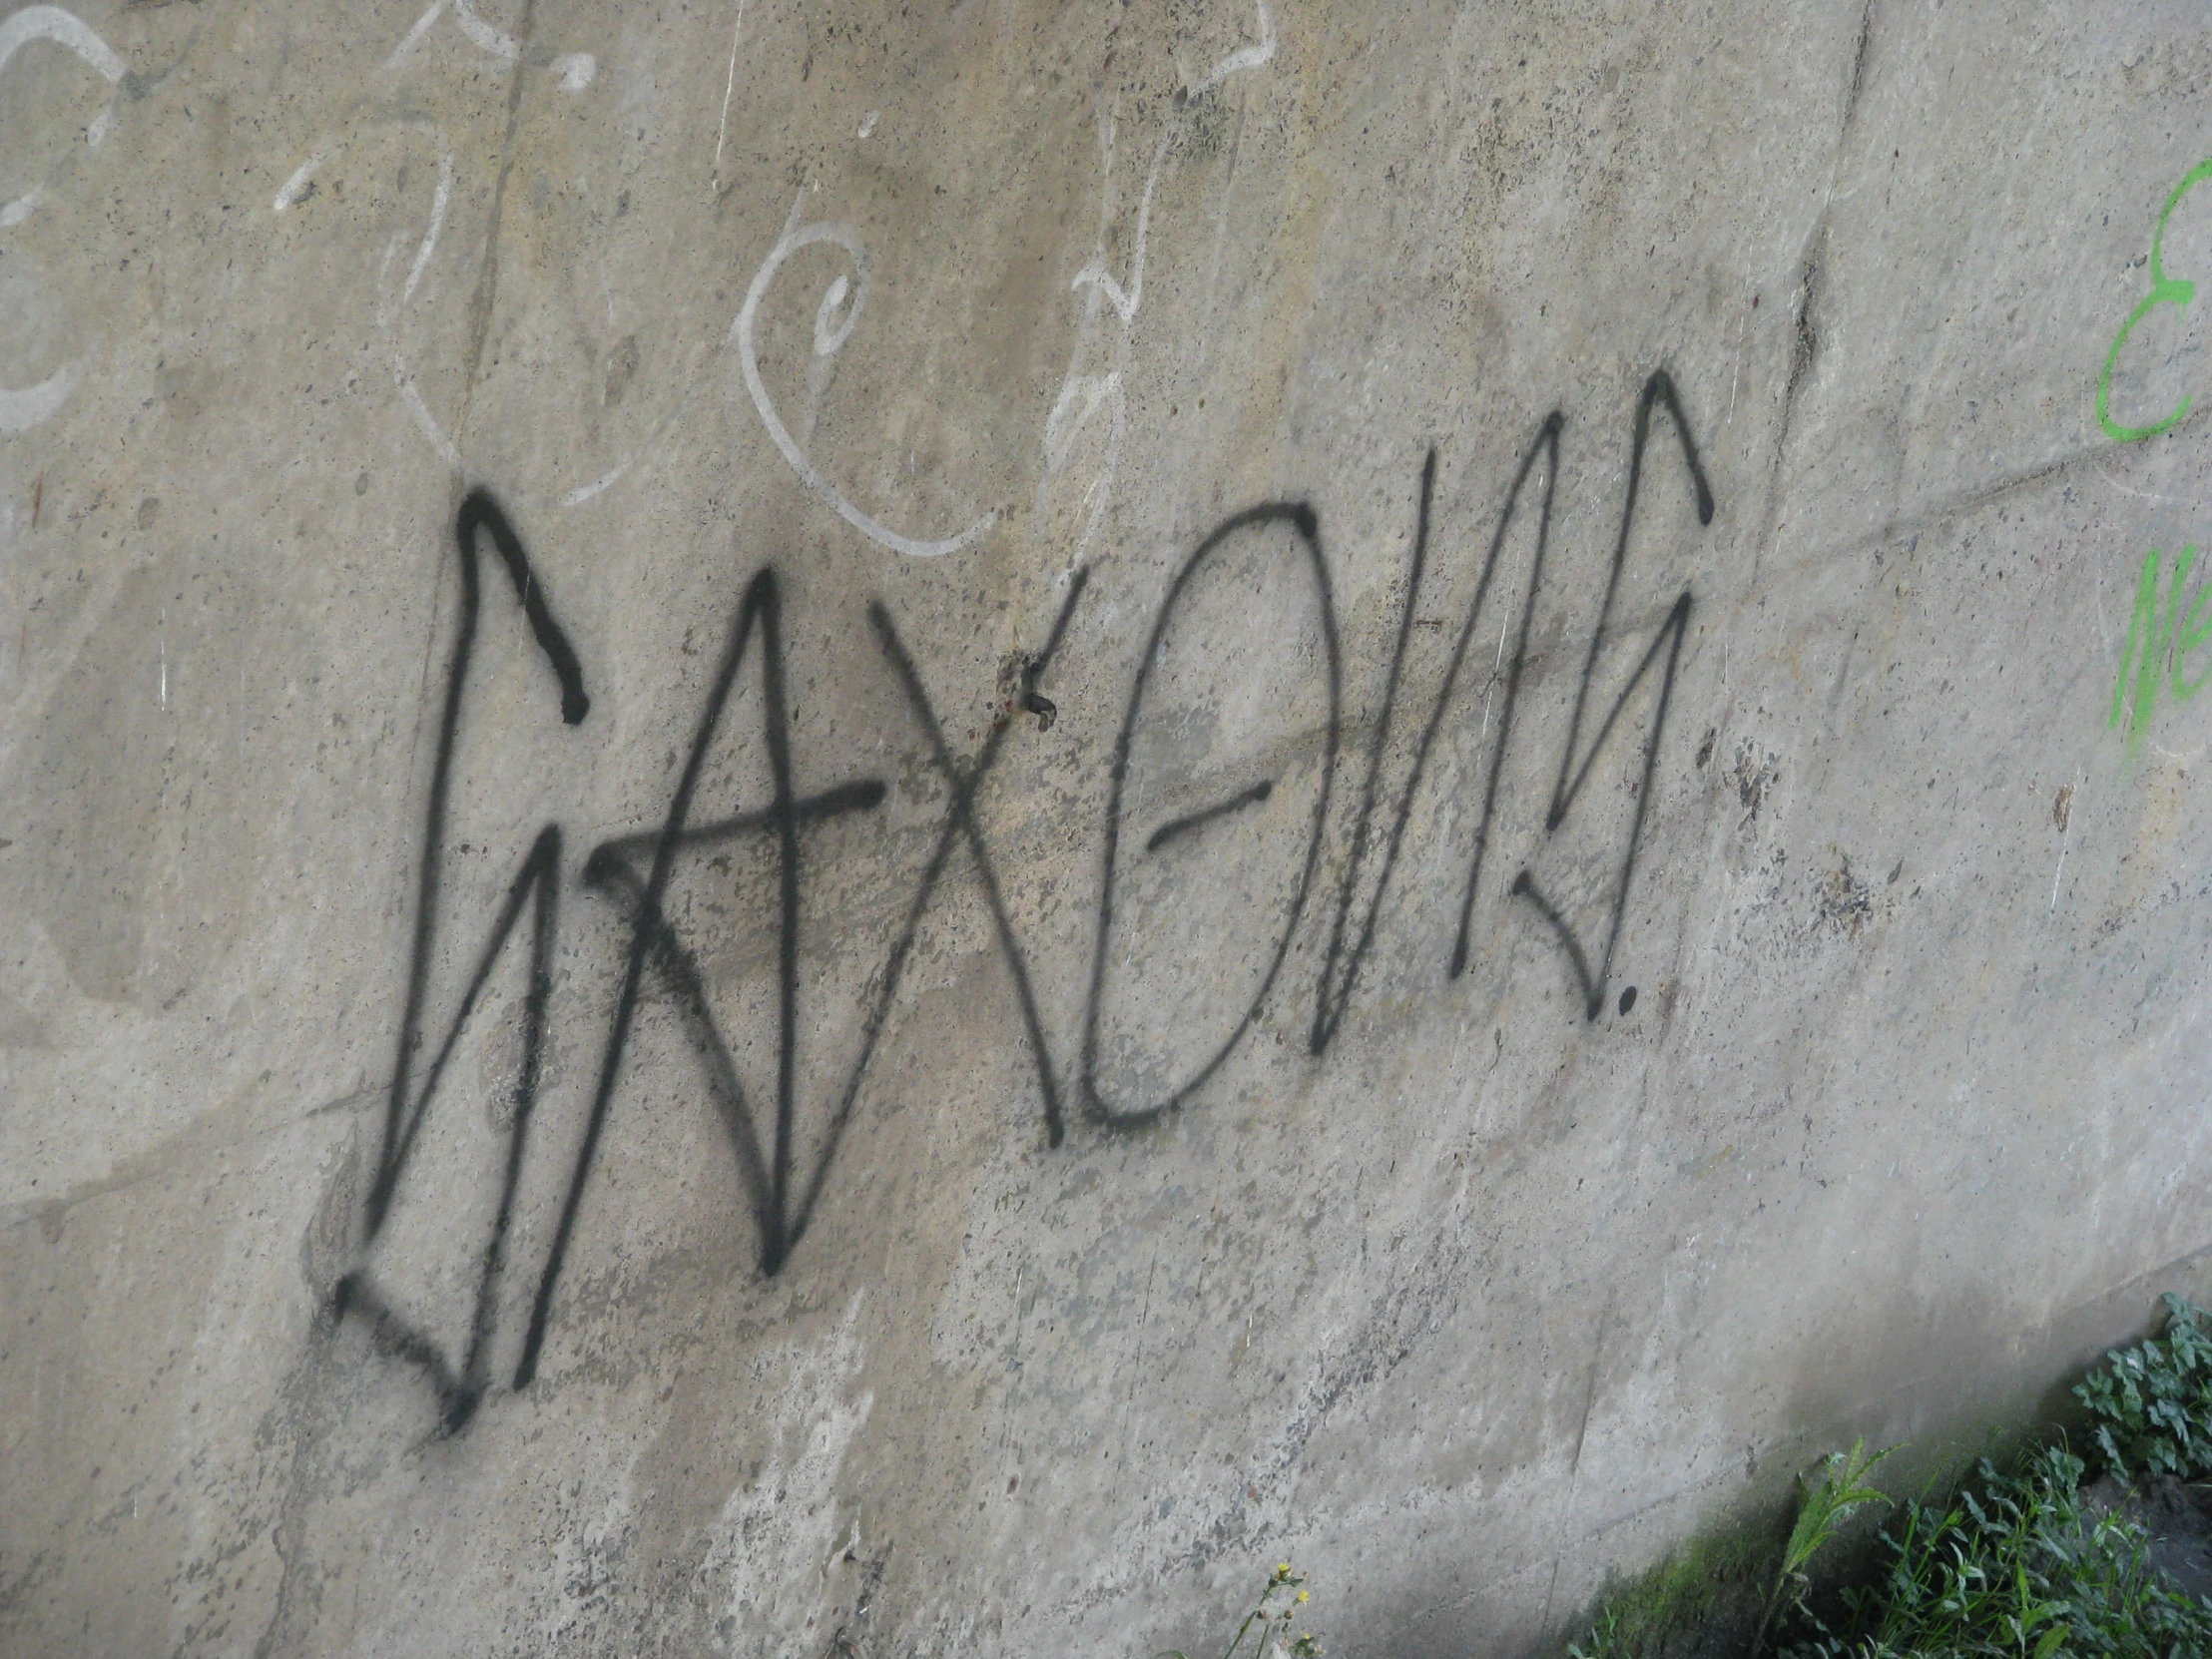 graffiti spray painted on a concrete wall in the daytime